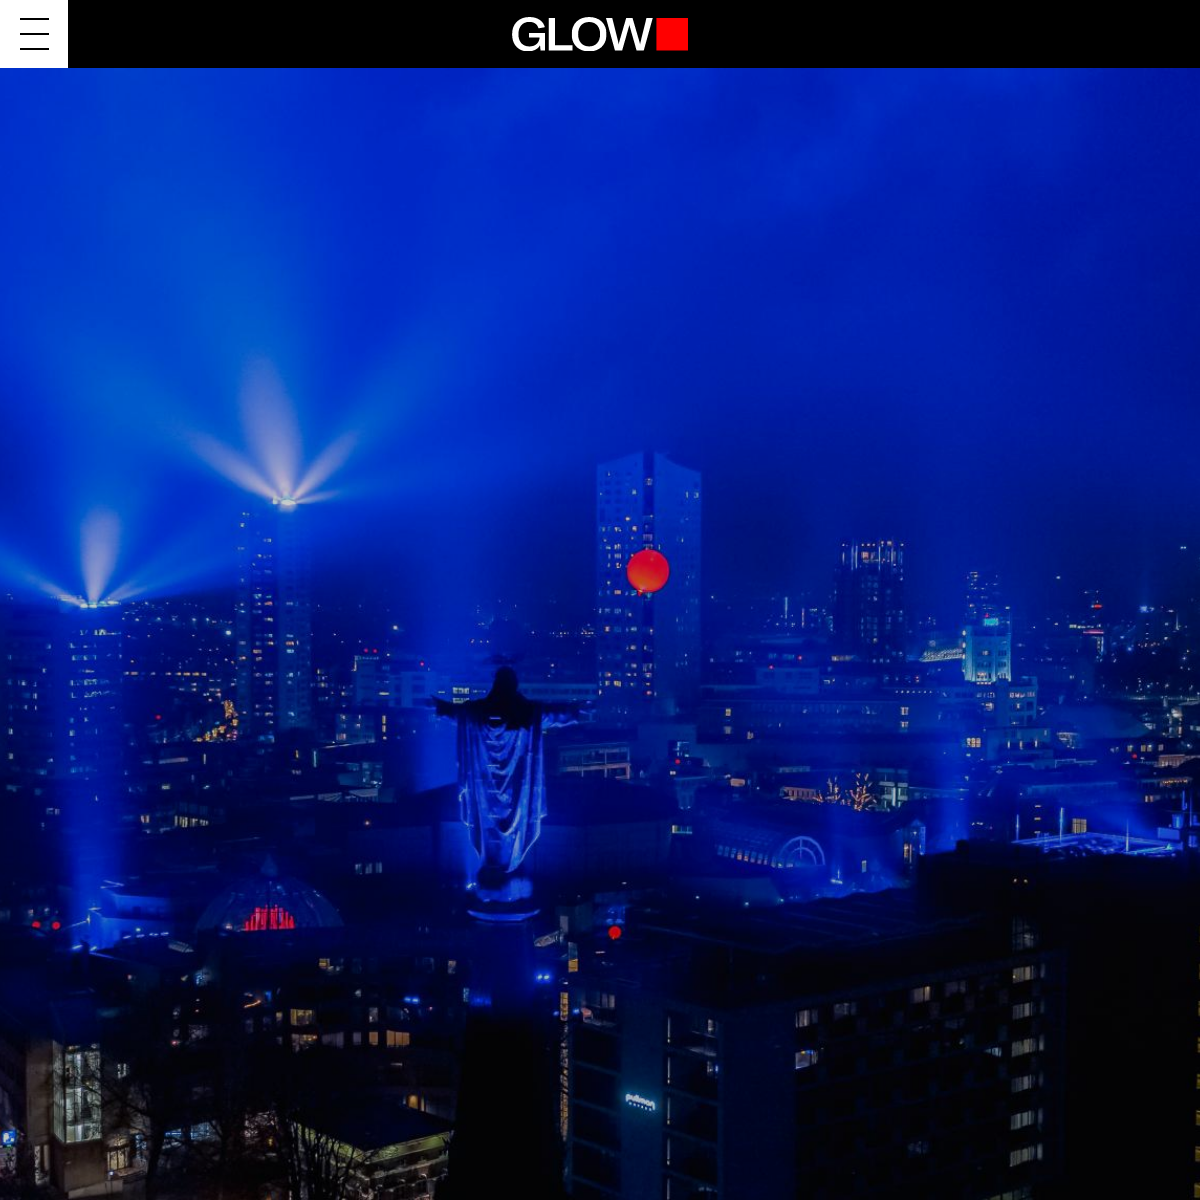 A complete backup of gloweindhoven.nl